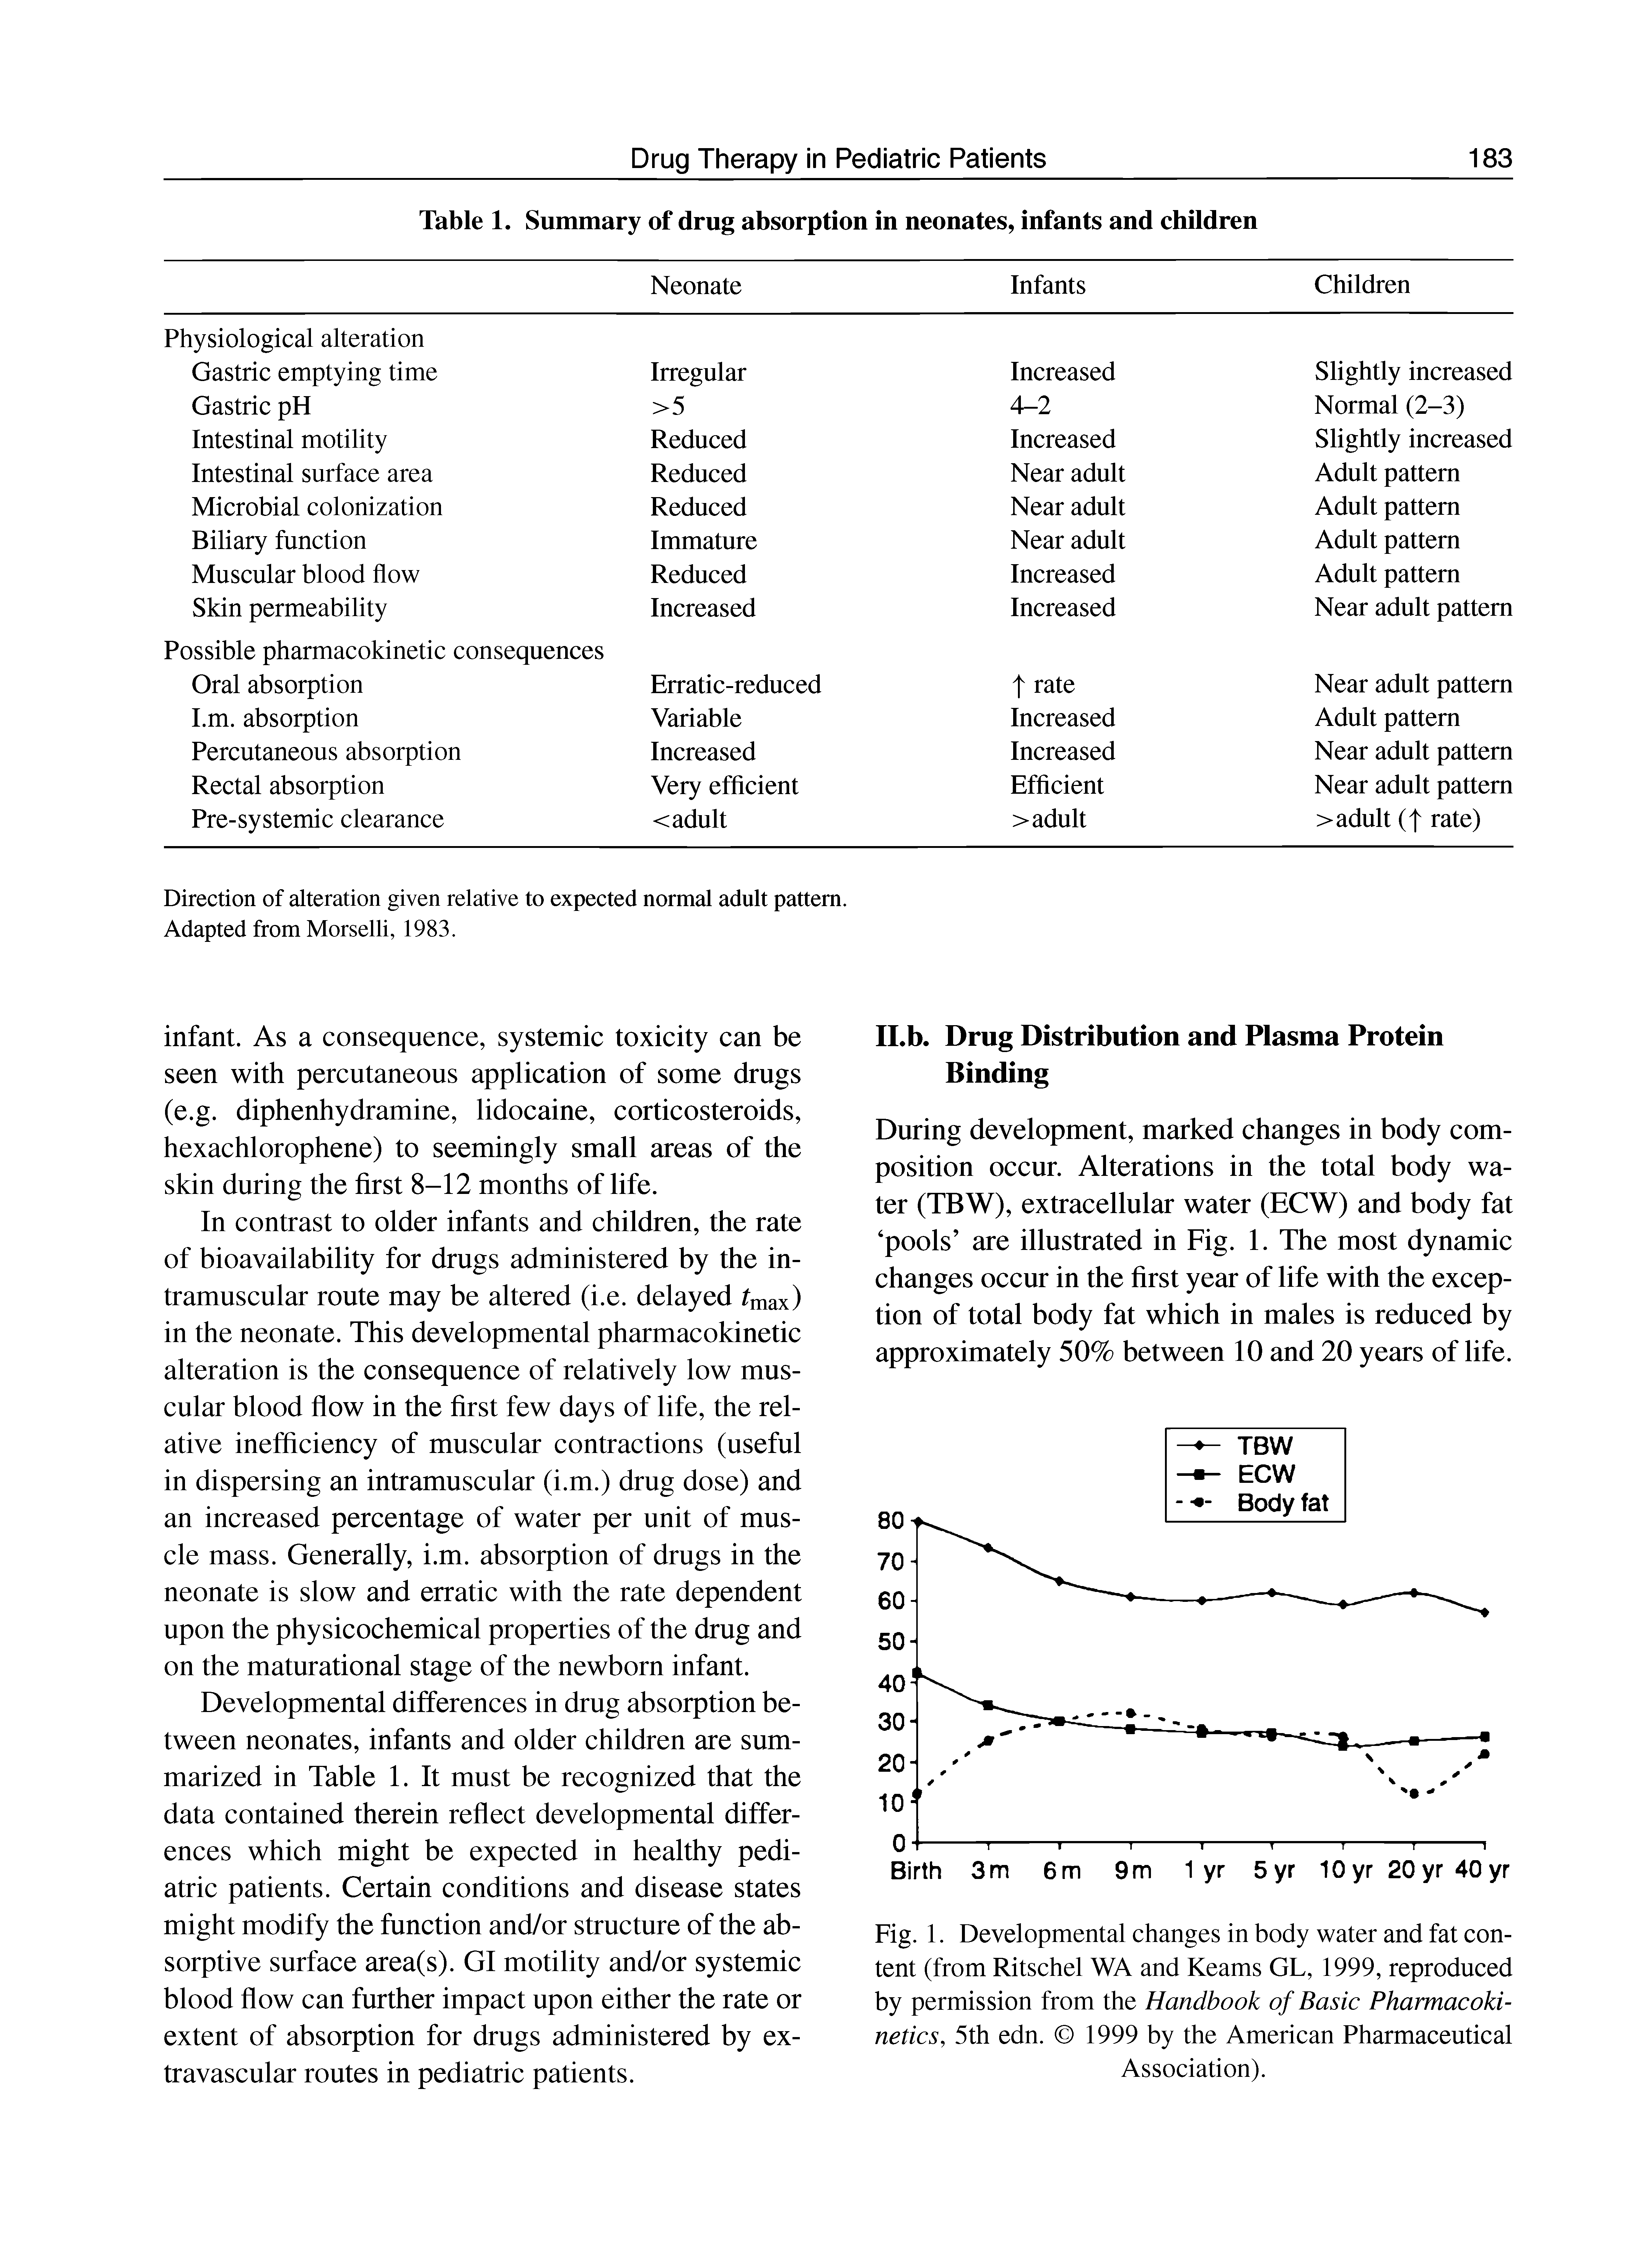 Fig. 1. Developmental changes in body water and fat content (from Ritschel WA and Kearns GL, 1999, reproduced by permission from the Handbook of Basic Pharmacokinetics, 5th edn. 1999 by the American Pharmaceutical Association).